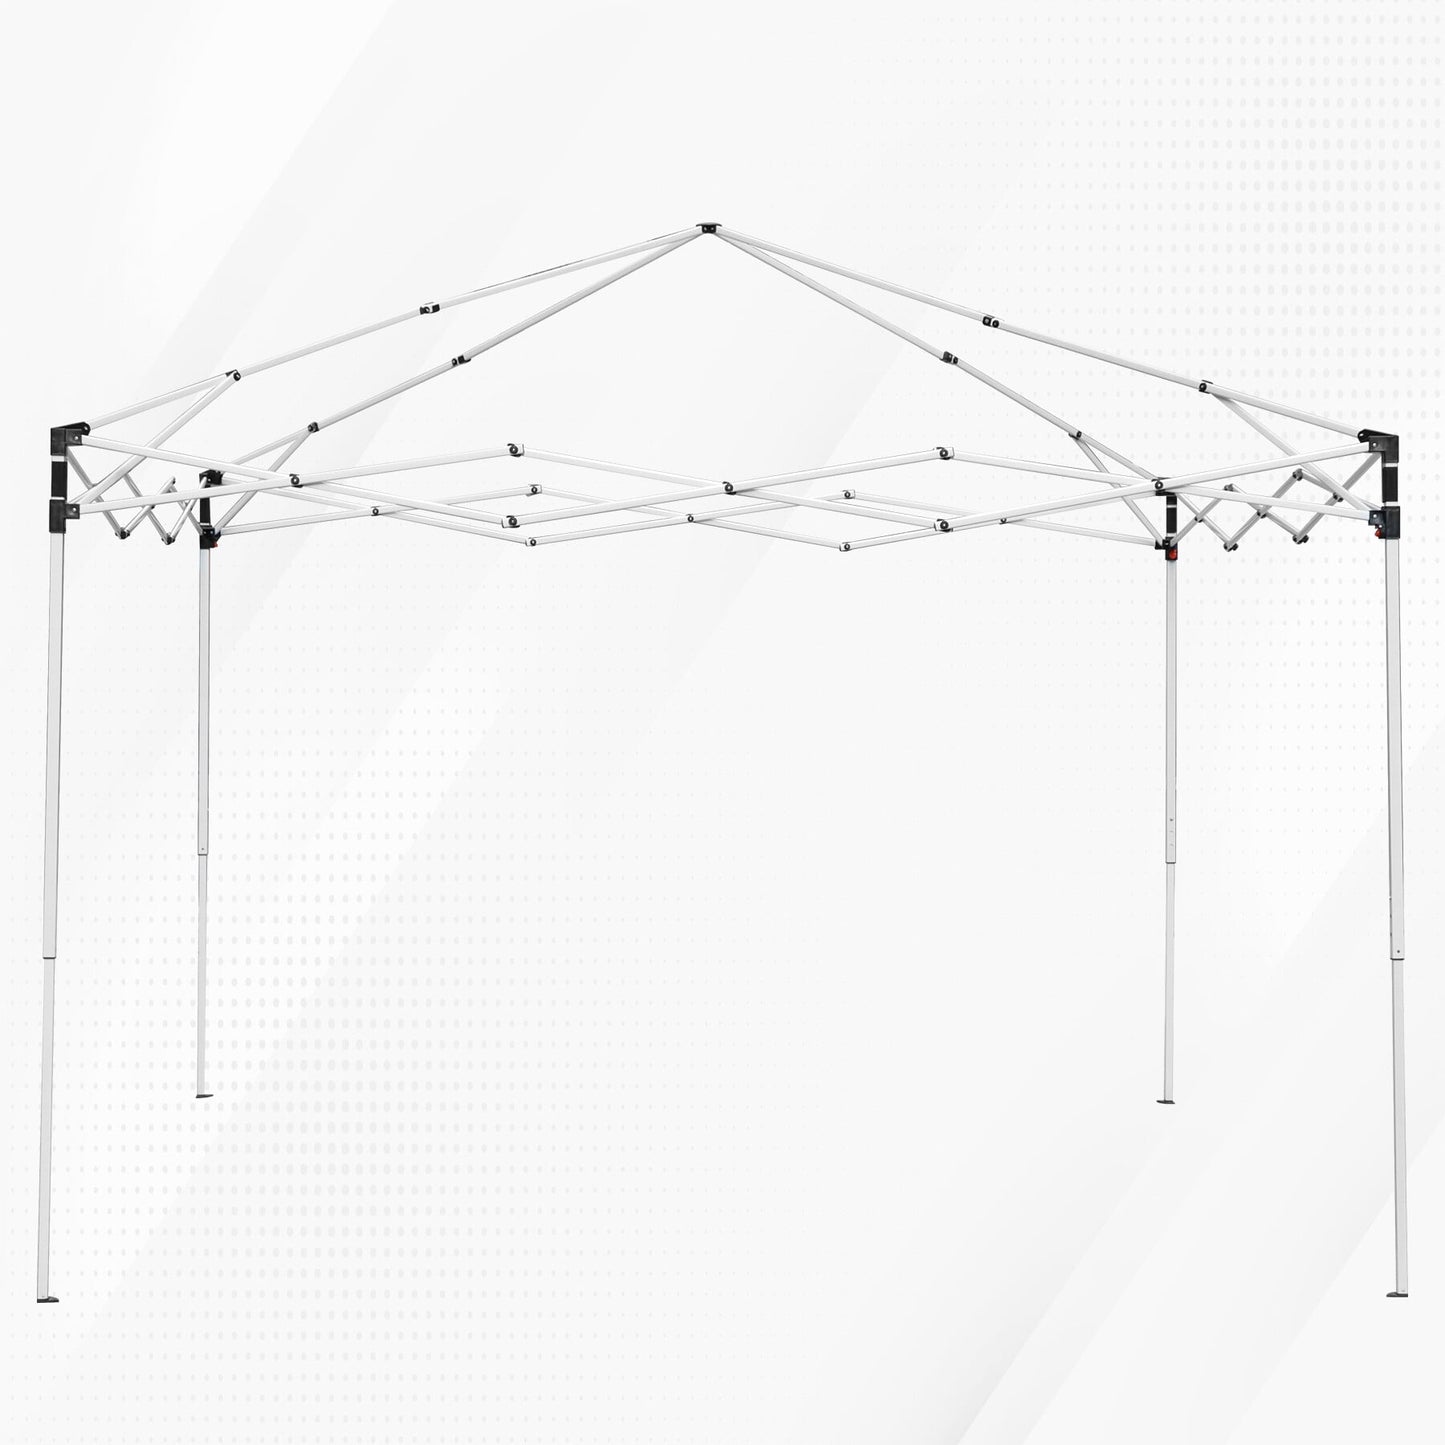 ZENY 10 x 10FT Party Tent Pop-up Canopy Foldable Waterproof Gazebo Tent with Carrying Bag, Gray